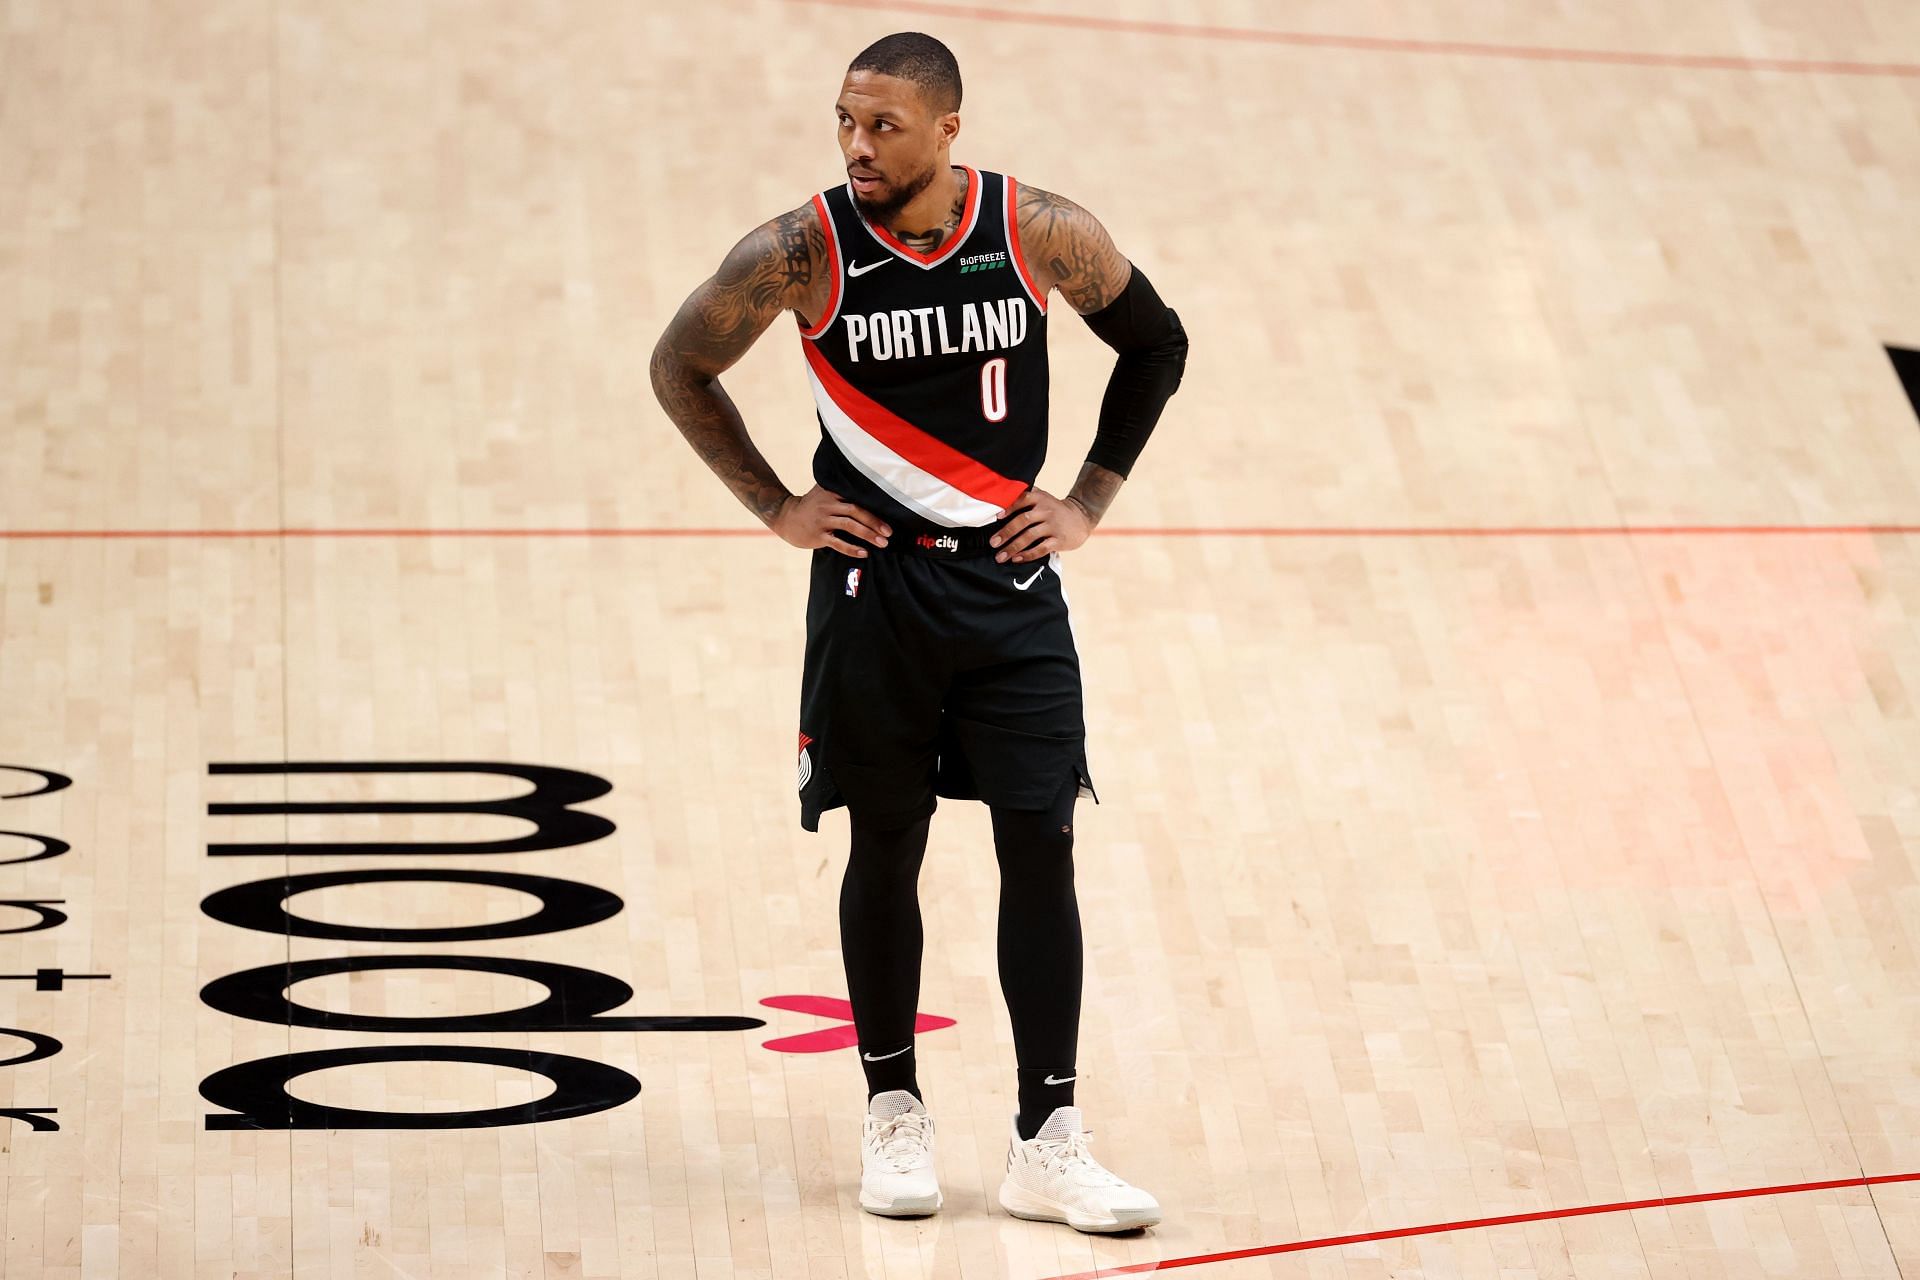 5 franchise records held by Damian Lillard for the Portland Trail Blazers